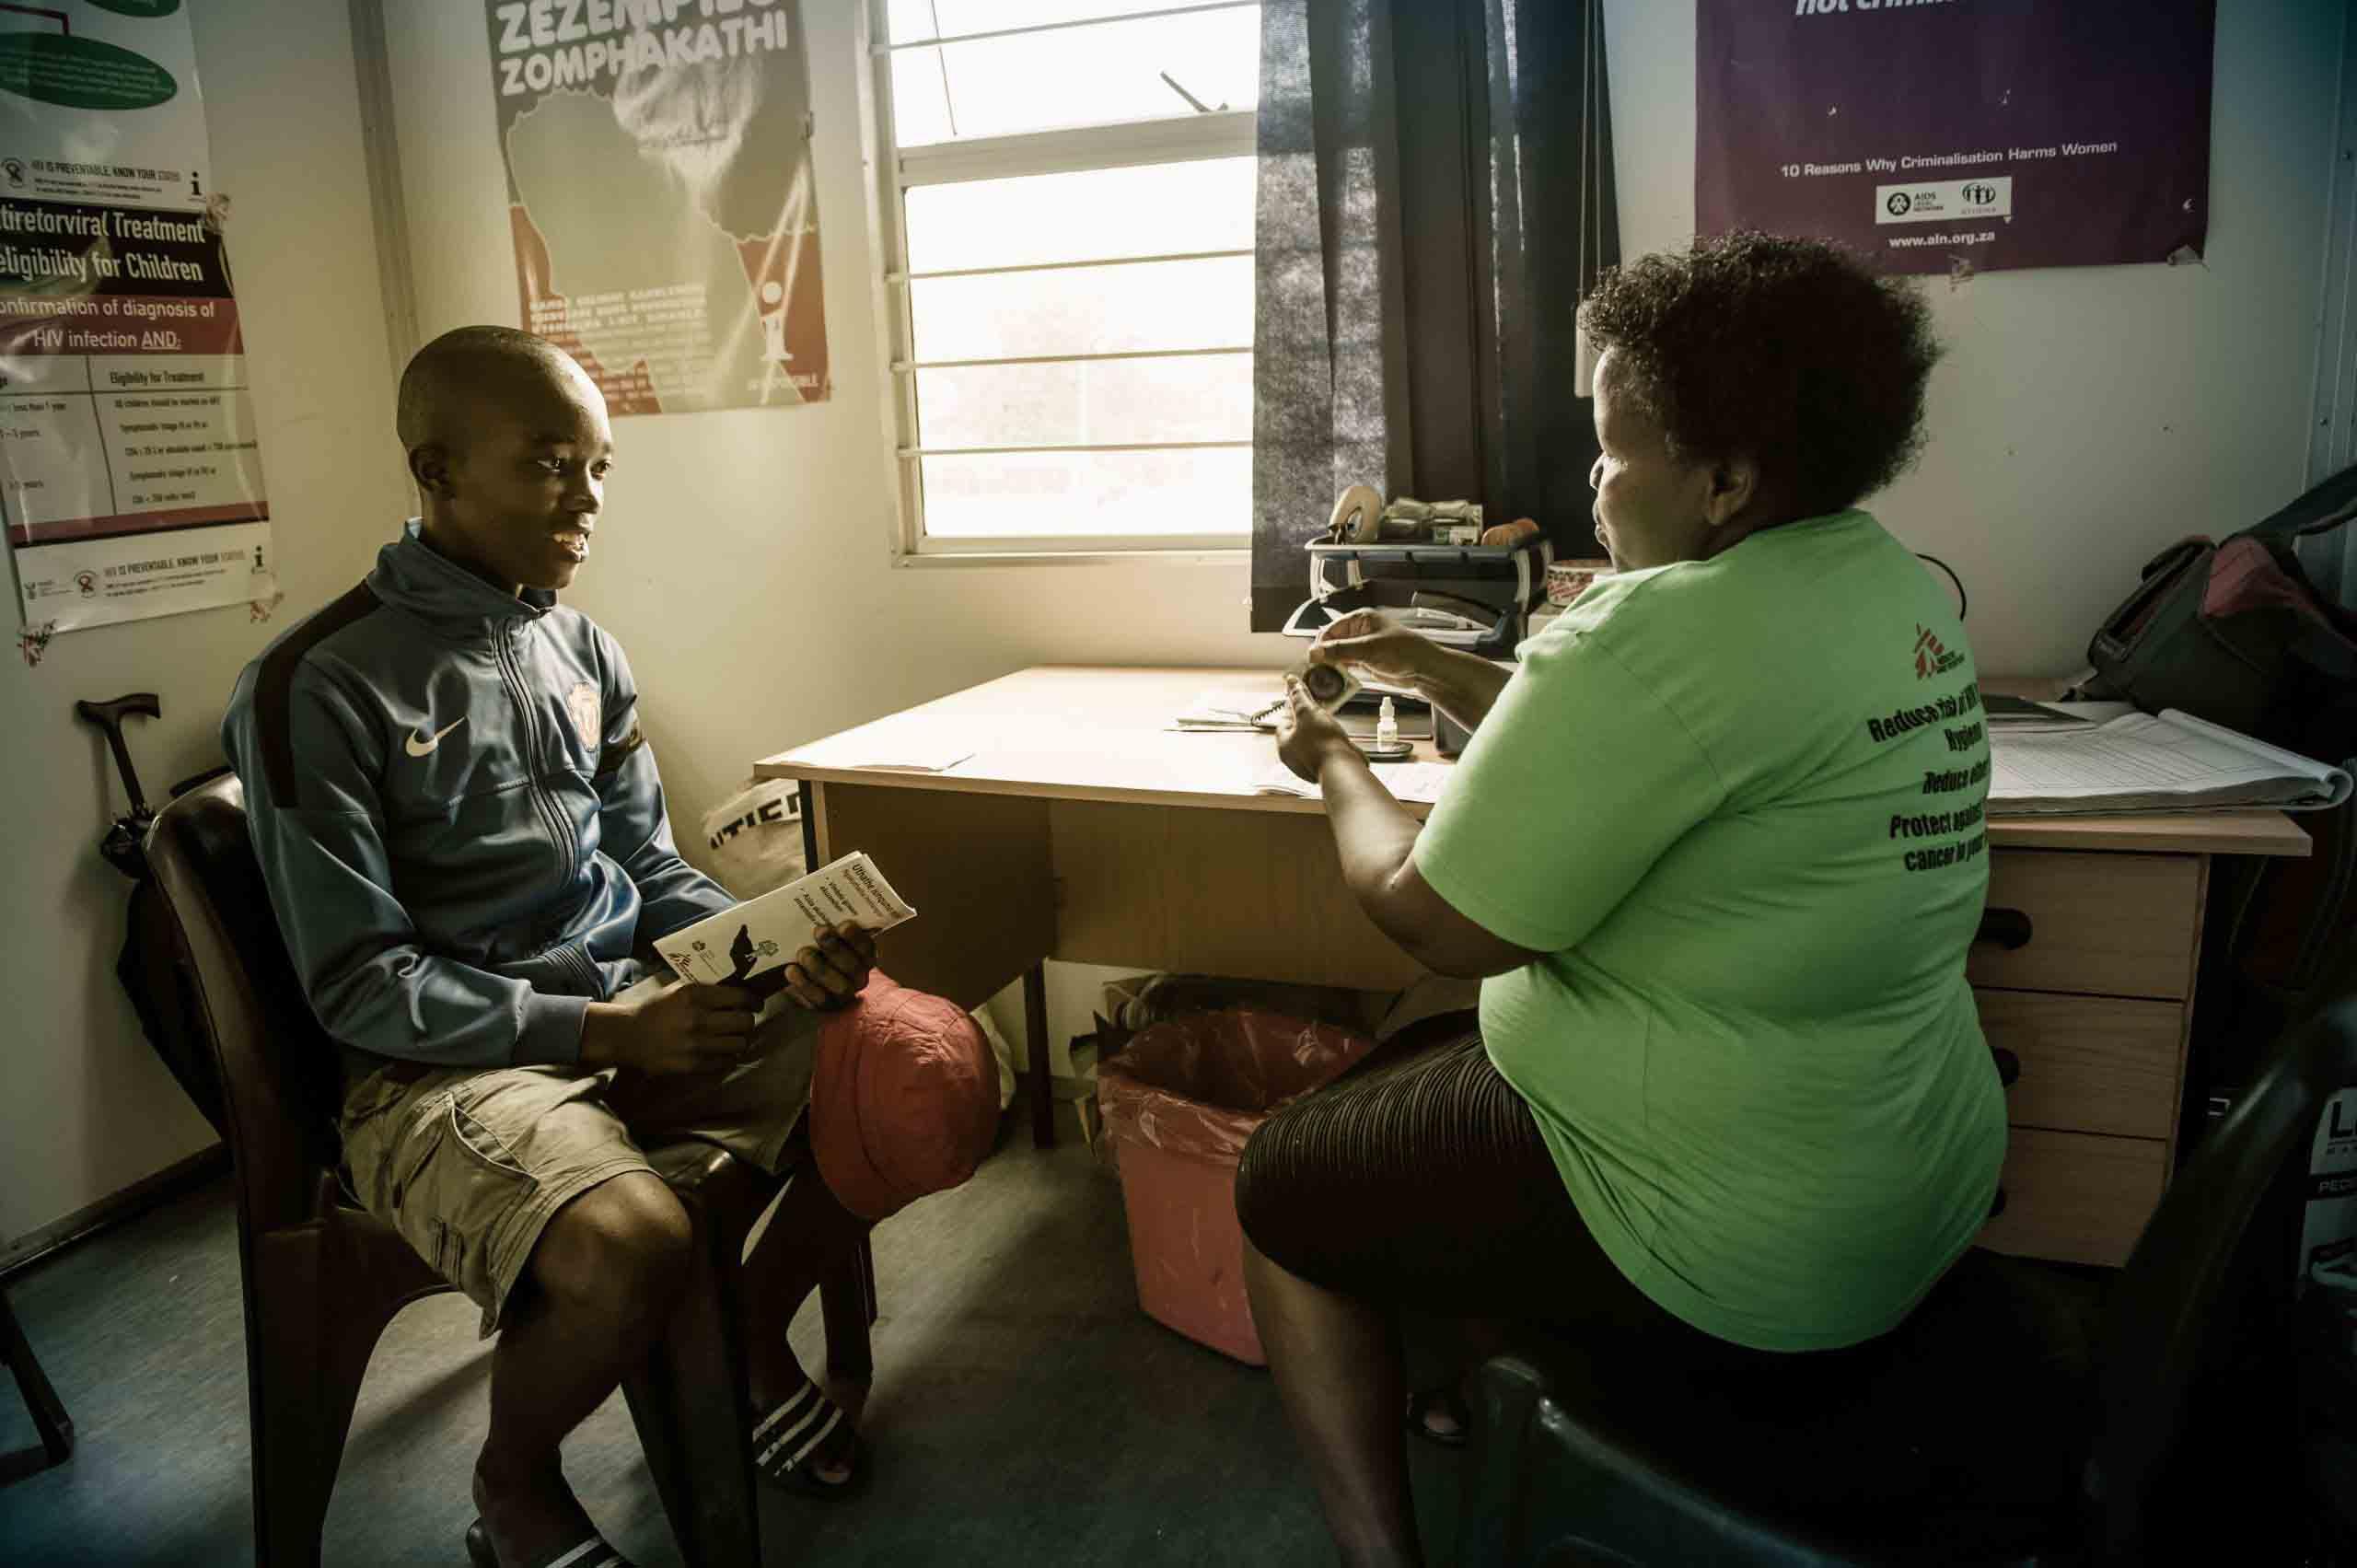 Doctors Without Borders Southern Africa: Schools Health Programme Toolkit